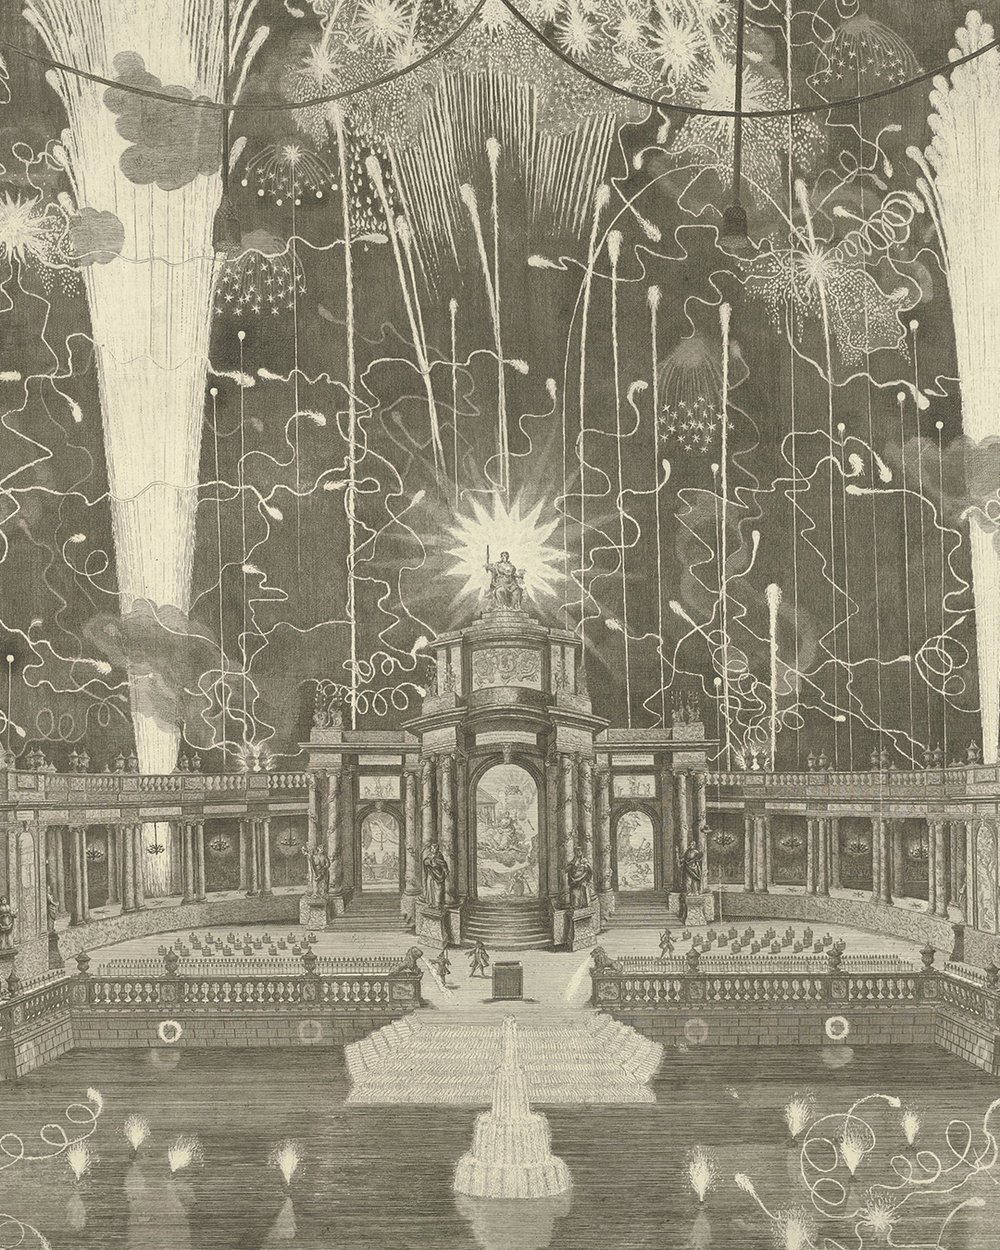 ''Fireworks in The Hague for the Peace of Aachen'' (1749)